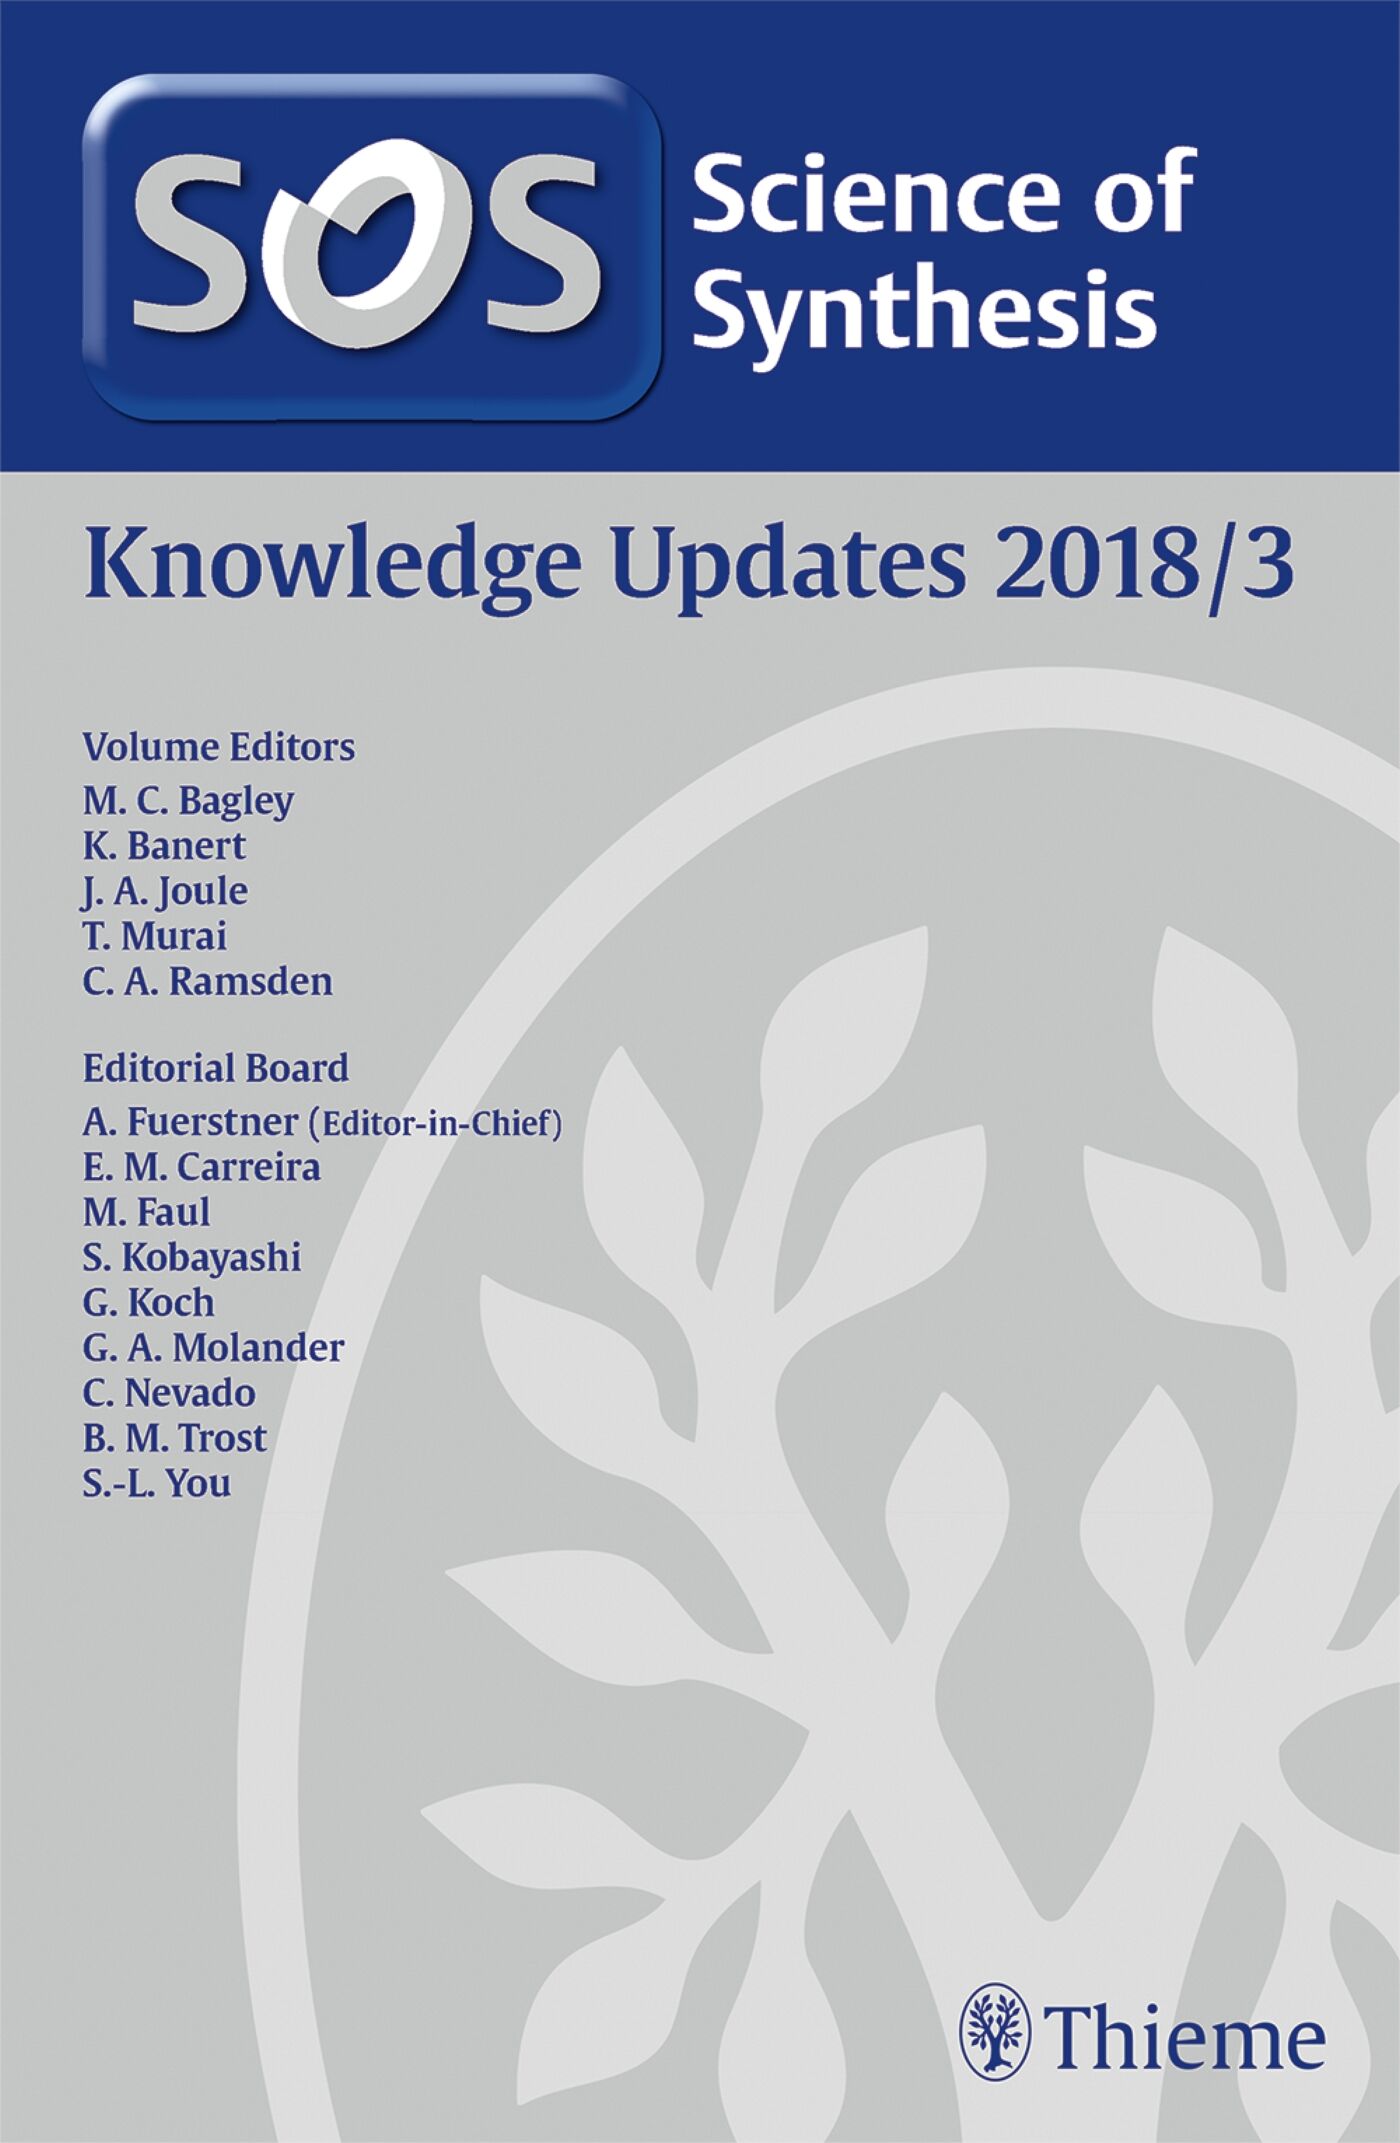 Science of Synthesis: Knowledge Updates 2018 Vol. 3, 9783132423213